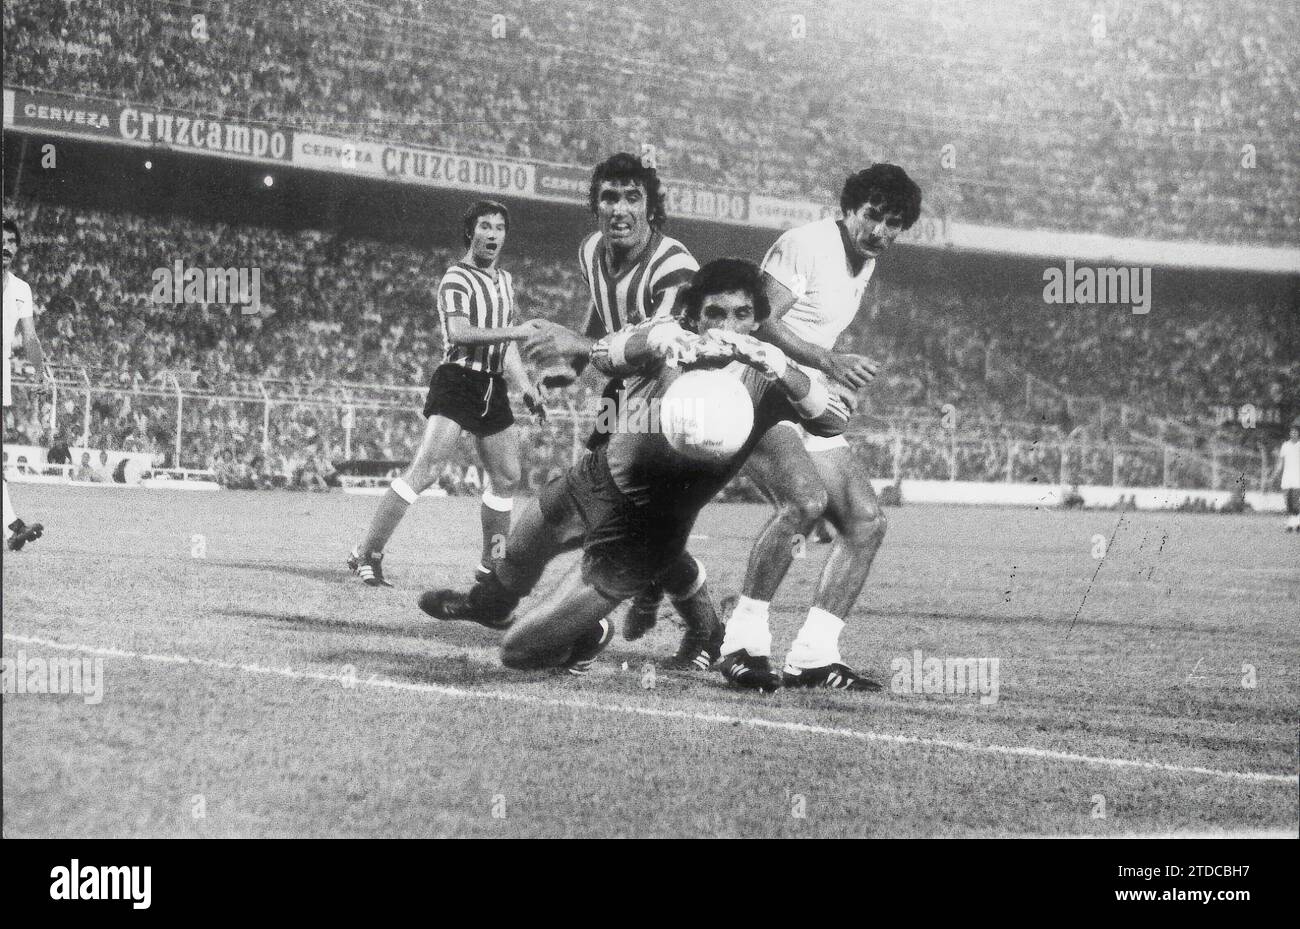 VII city of Seville in the 1978 city of Seville trophy, the white goalkeeper Gustavo Fernández was one of the most outstanding protagonists by making saves like the one illustrated in the image and, above all, by stopping a penalty taken by Mühren, which allowed the Sevilla's final victory 1-0. The Beticos Sebastián Alabanda and Javier López and the Sevillista Juanito, who also appear in the photograph, have a personal vision of the Derbies of those years. Credit: Album / Archivo ABC / DOBLADO Stock Photo